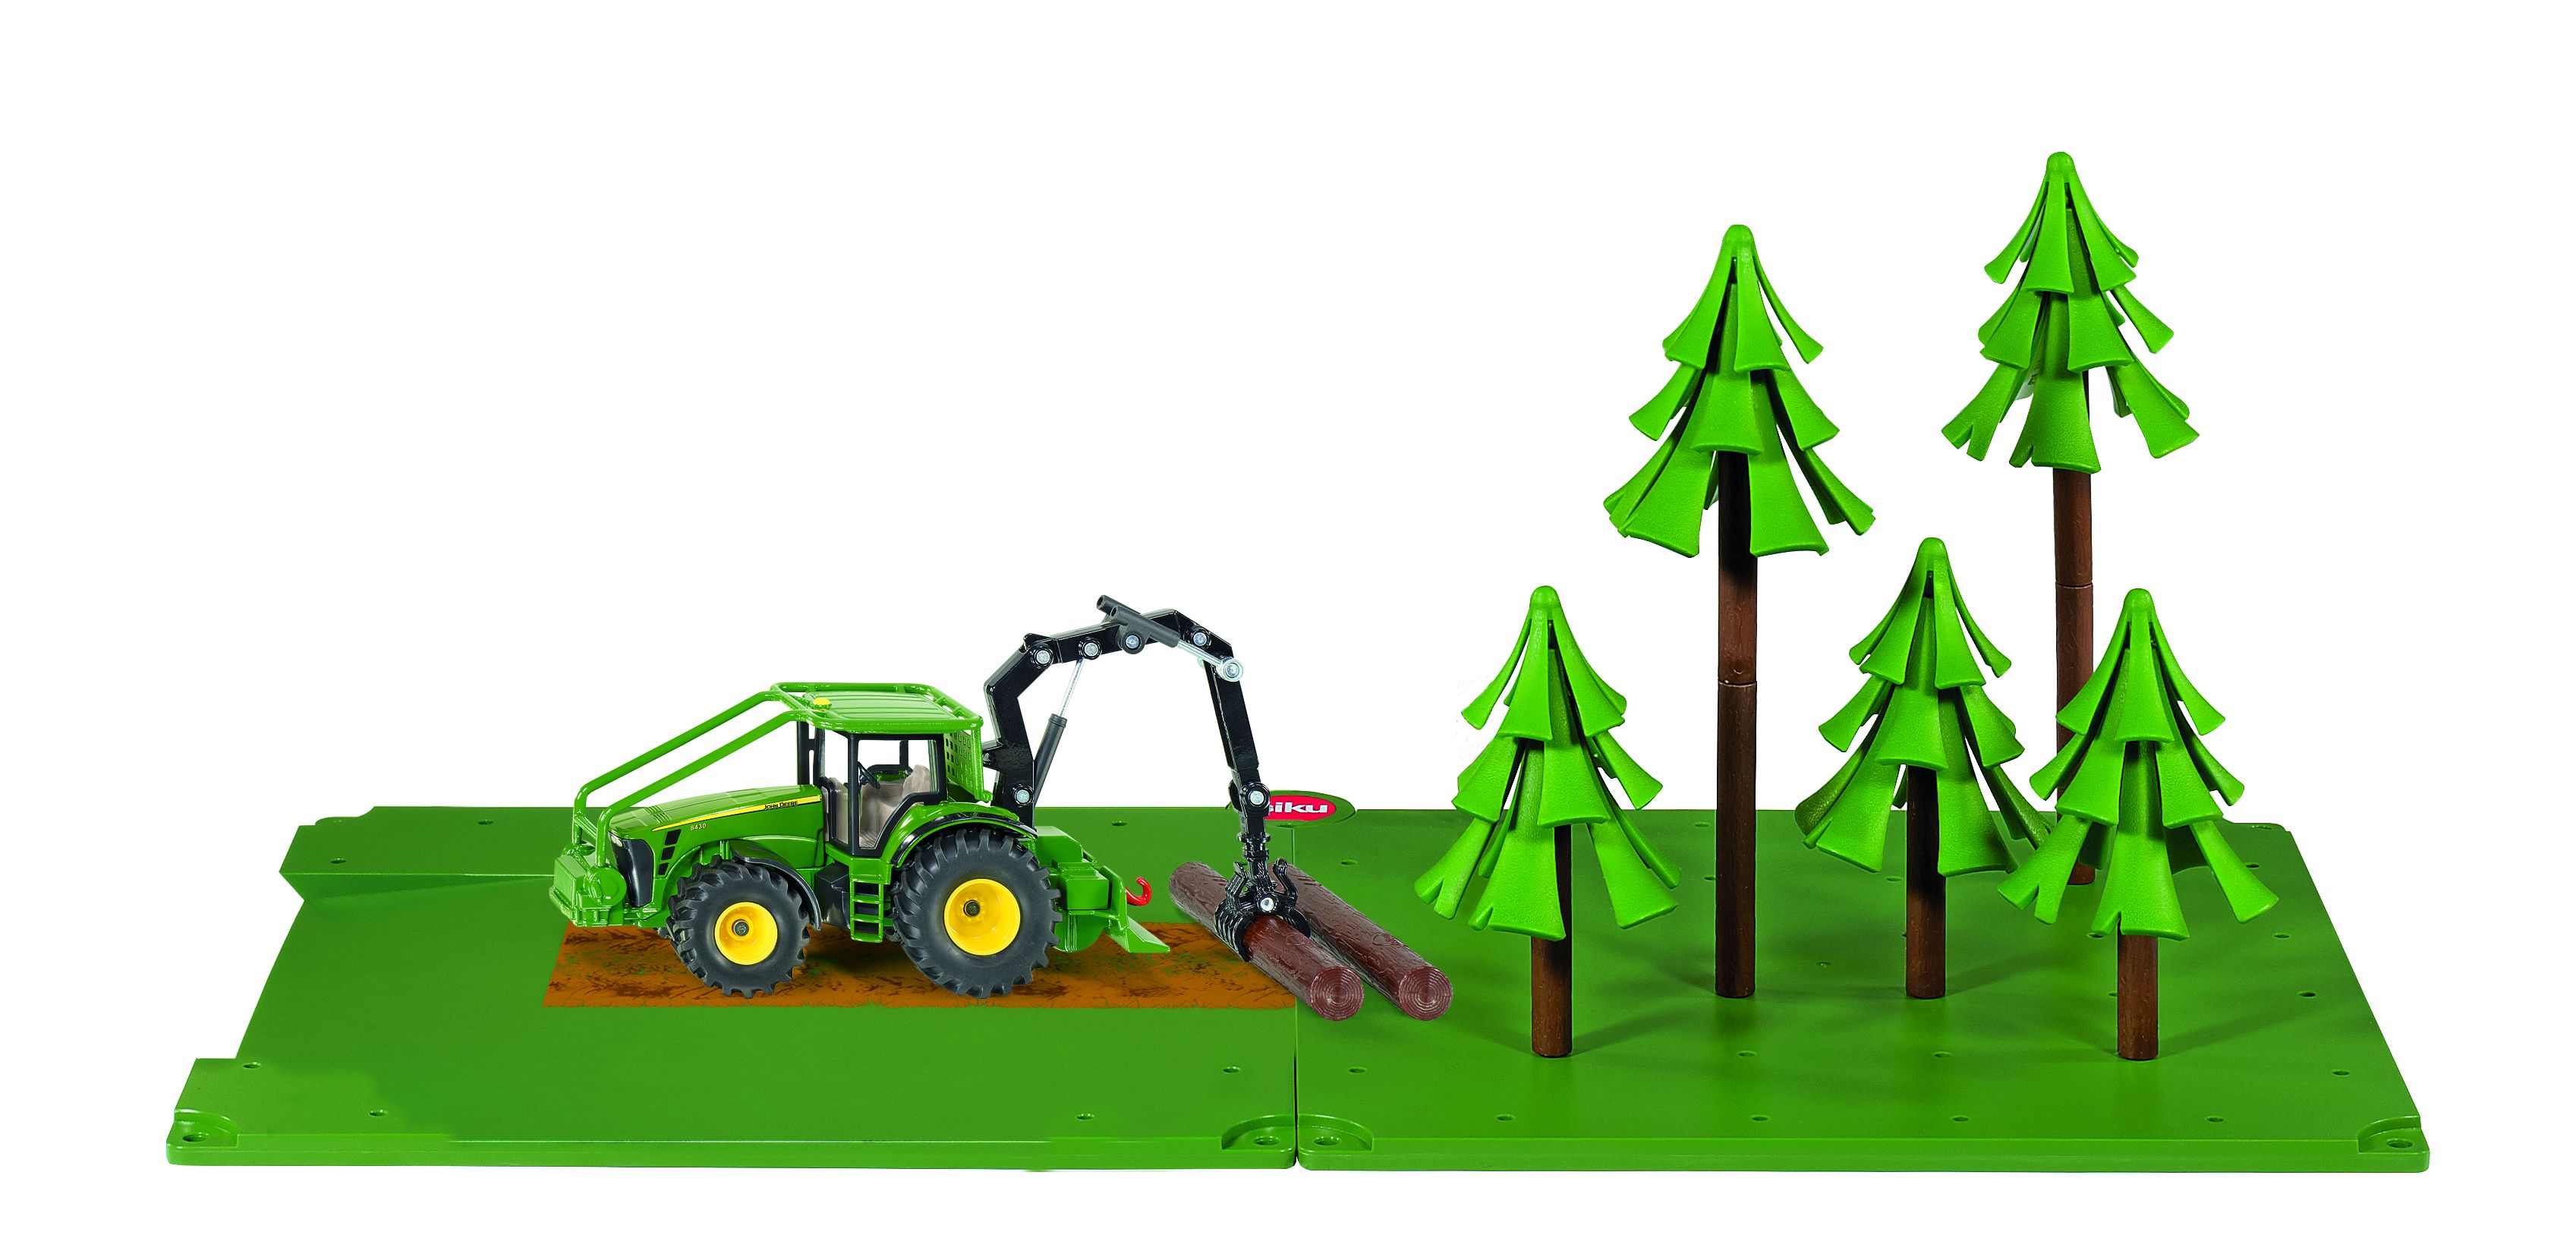 Forestry Set with John Deere Tractor